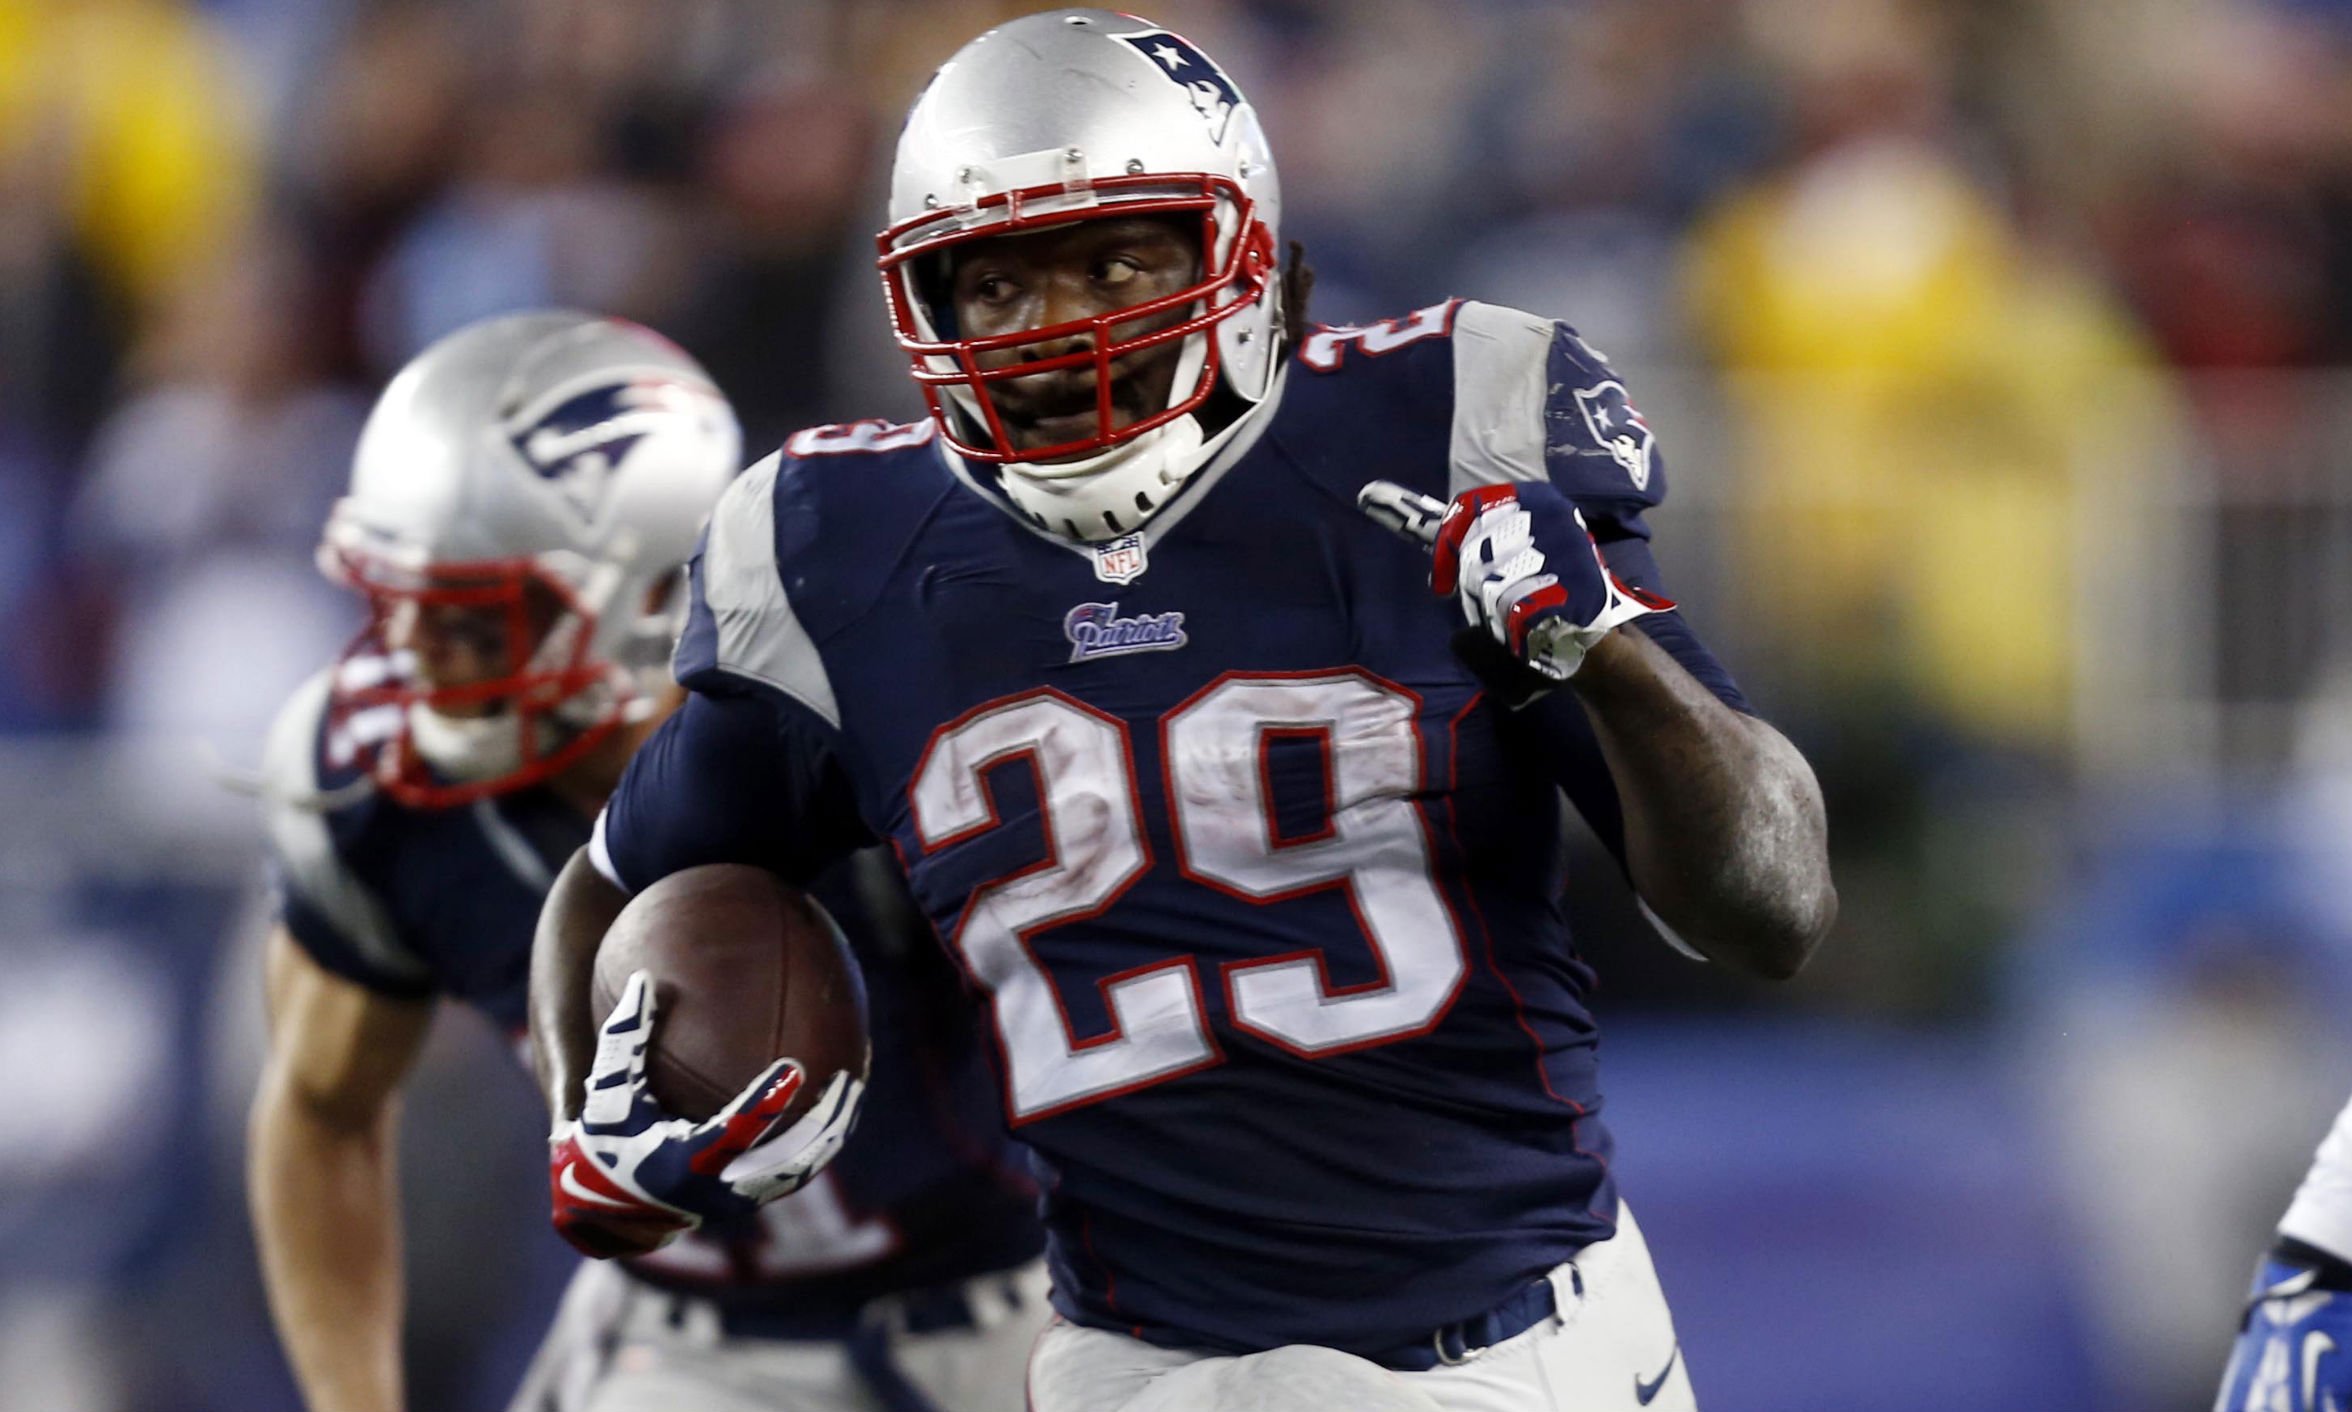 Courtesy of USA Today: Blount's redemption story could culminate with a win on Sunday.